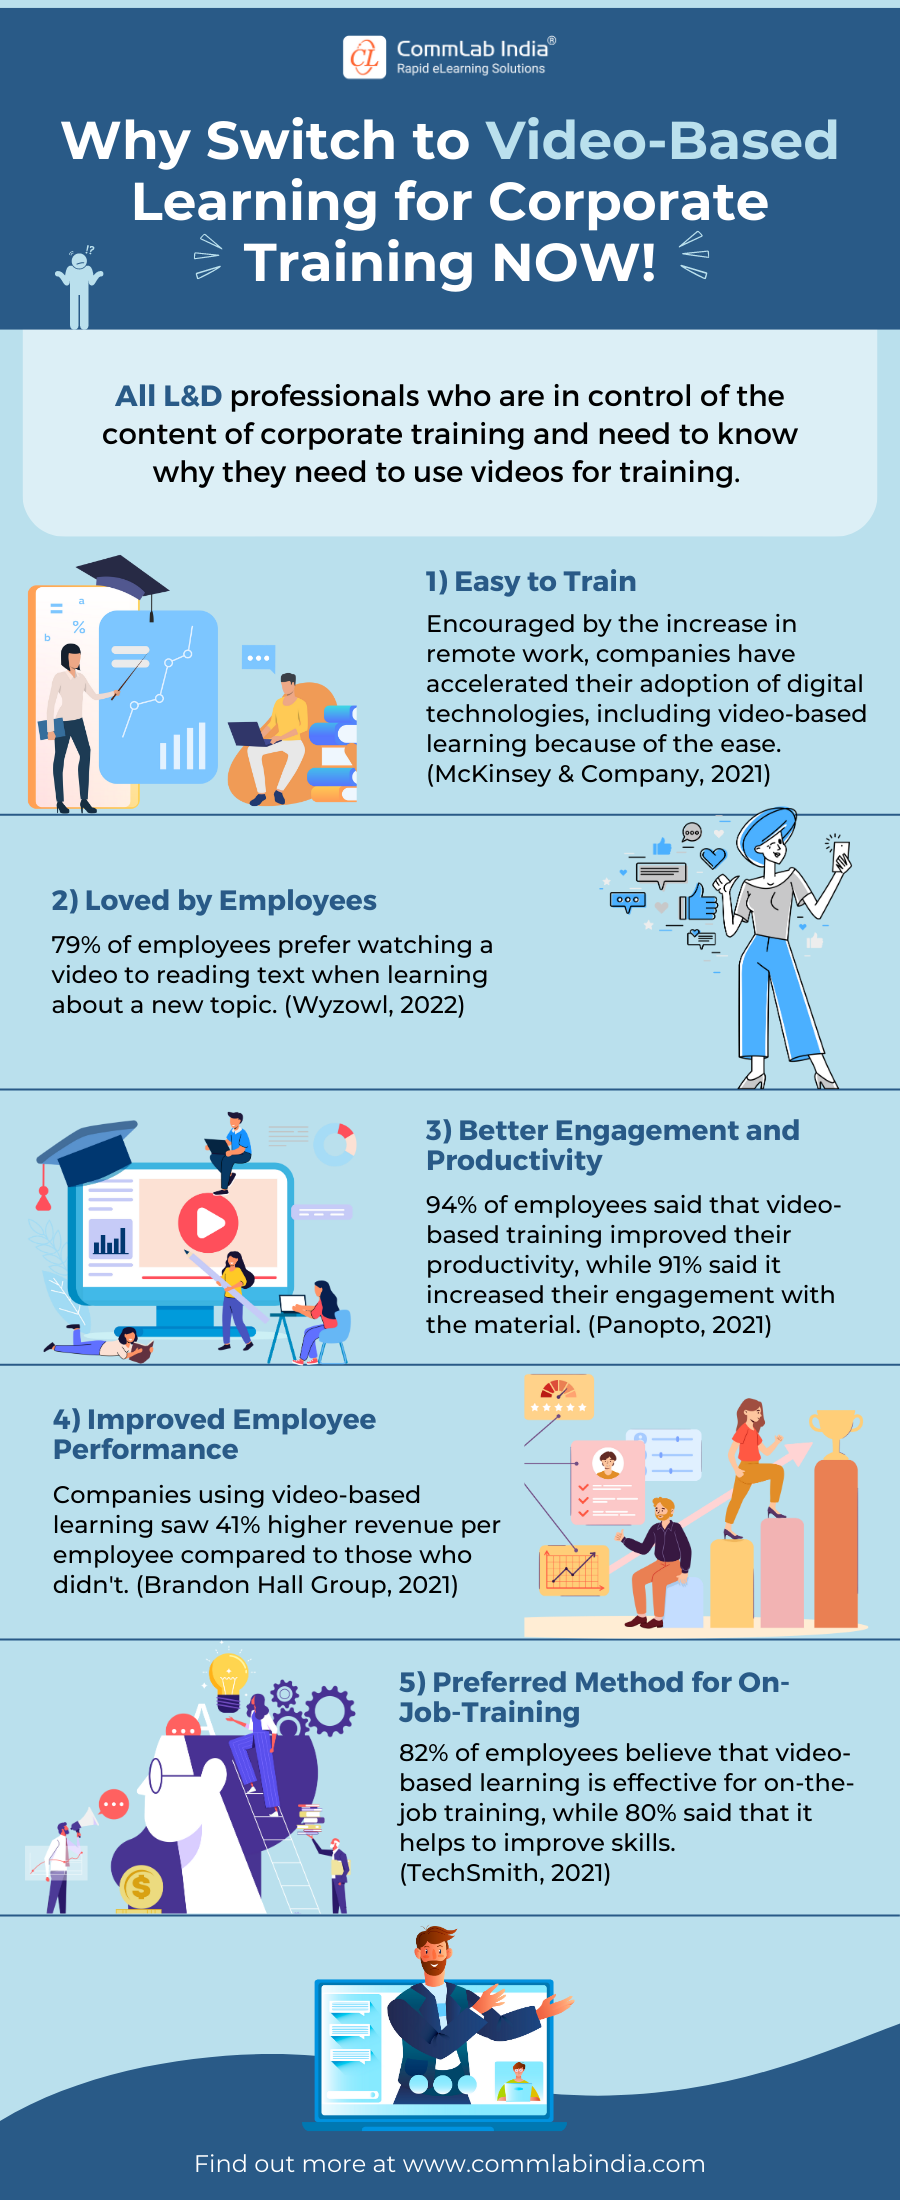 Why Switch to Video-based Learning